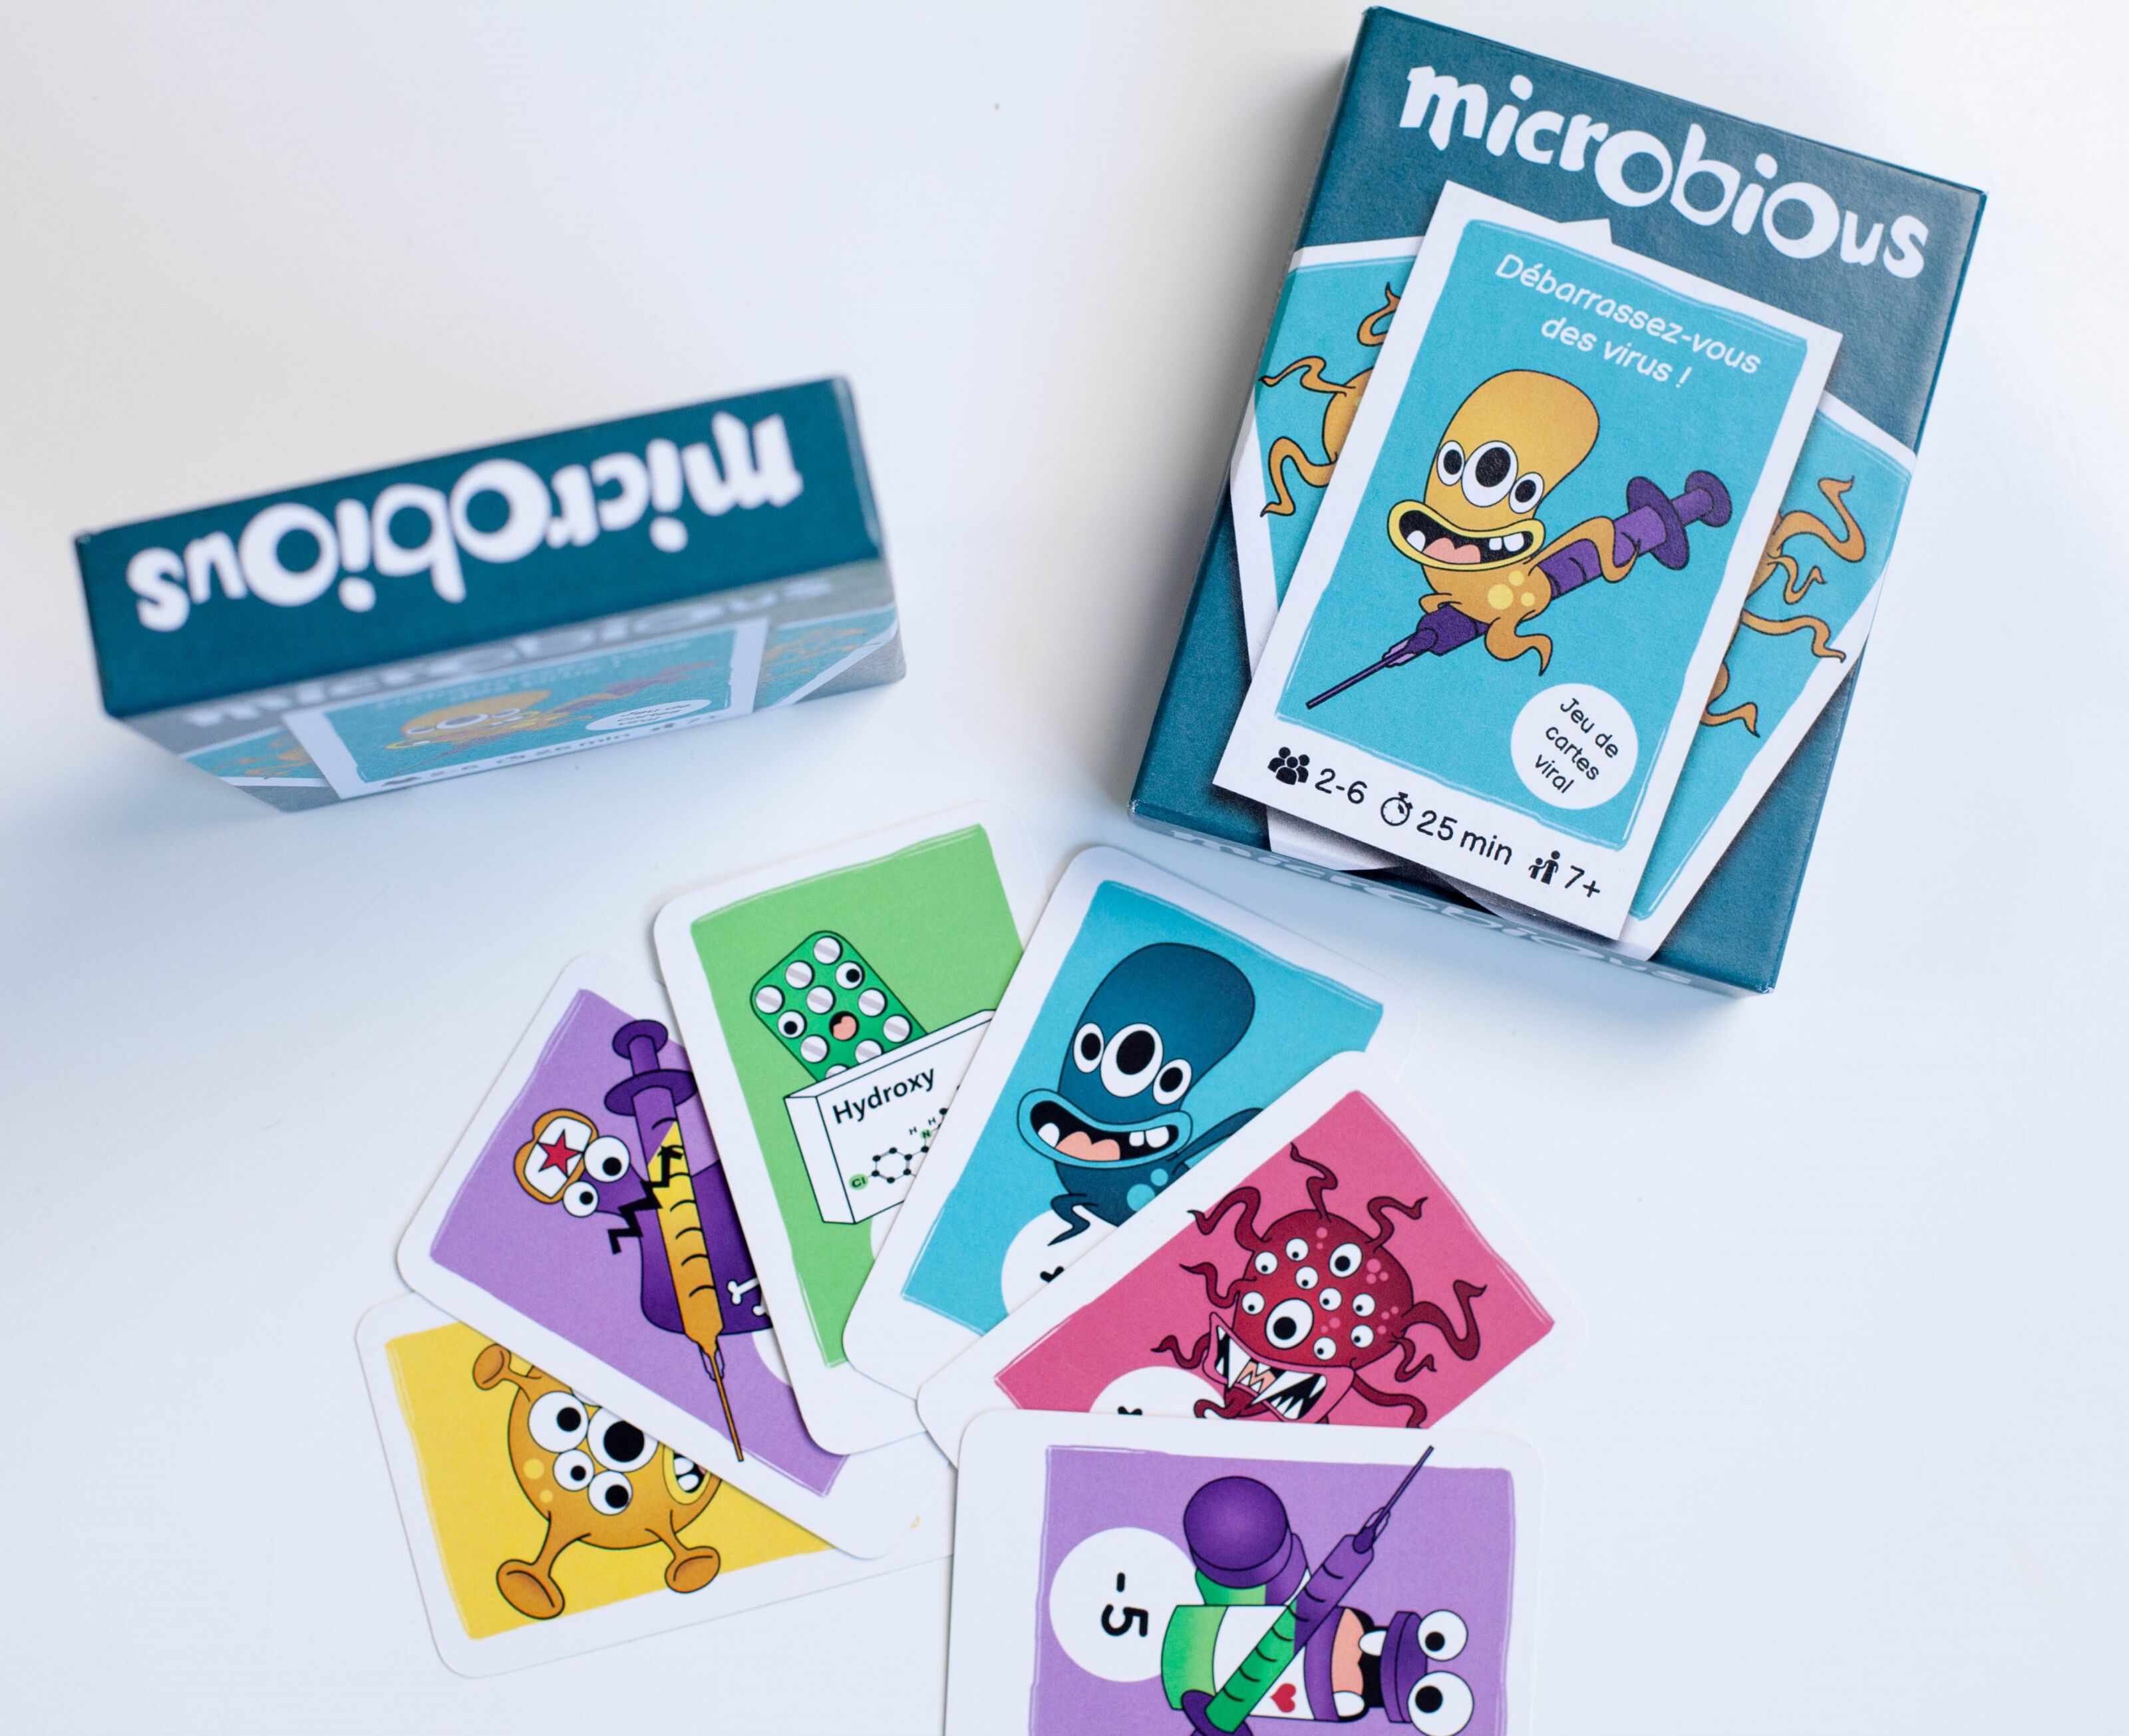 Buy wholesale Microbious - The Viral Card Game